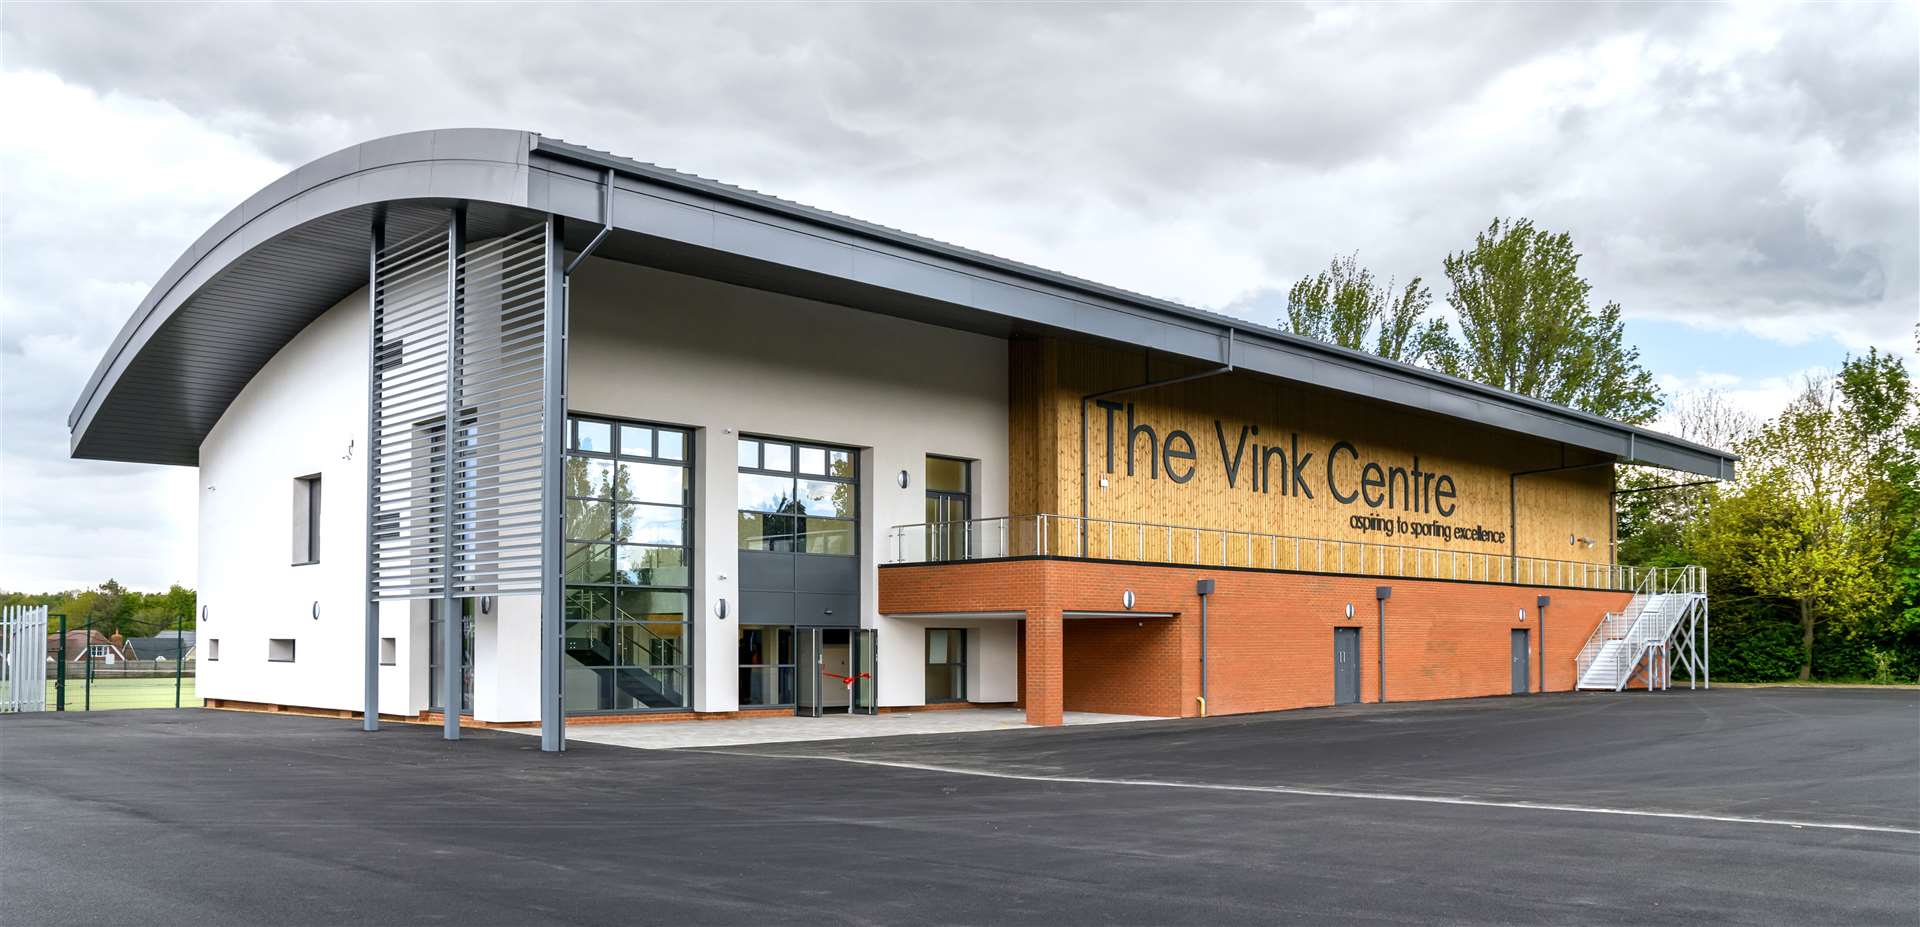 Among Mr Danielsen's many achievements during his time at Highworth, he orchestrated the construction of the new gym building called the Vink Centre